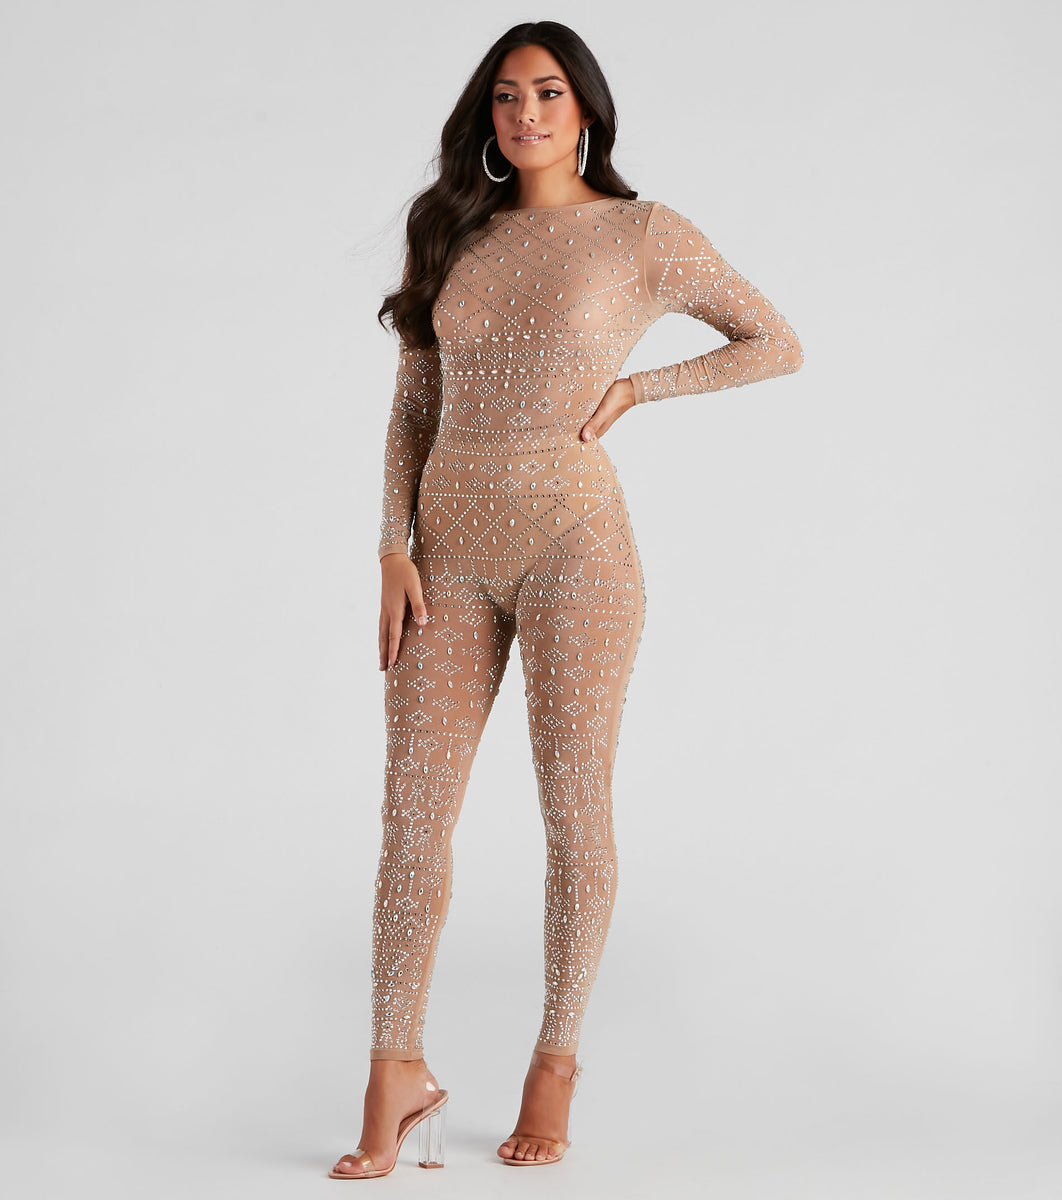 Iridescent Stunner Embellished Catsuit